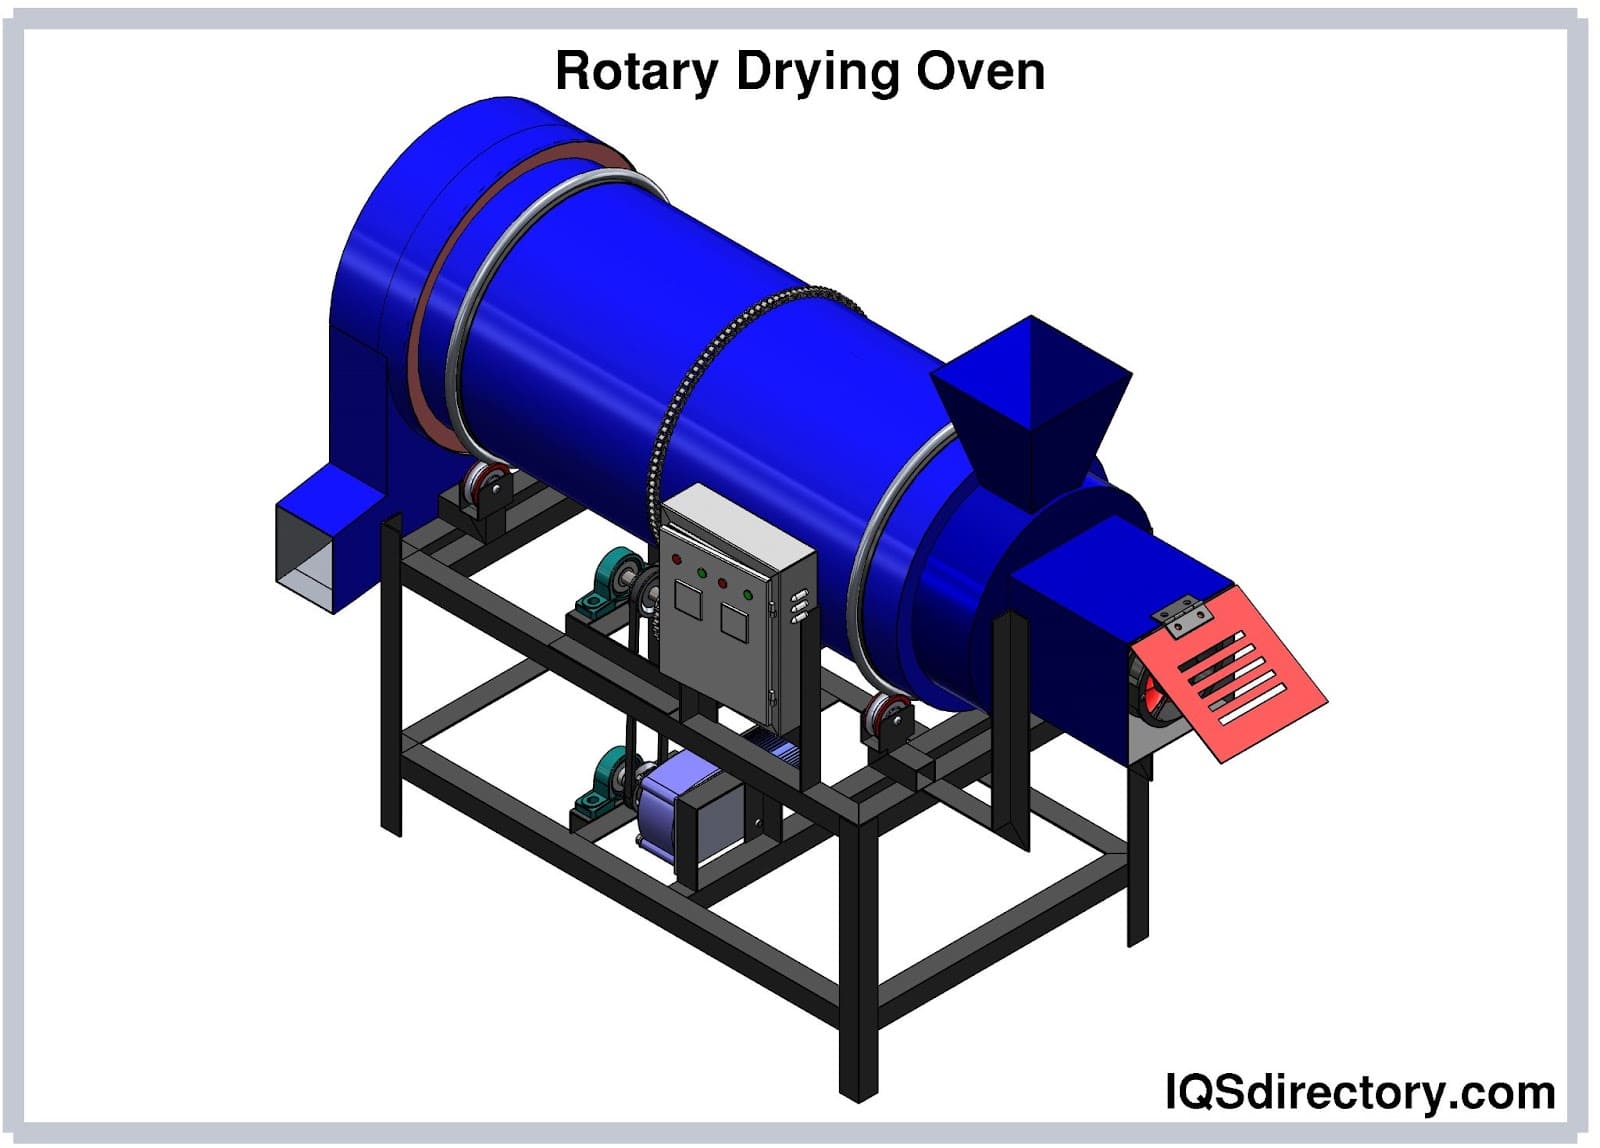 Rotary Drying Oven